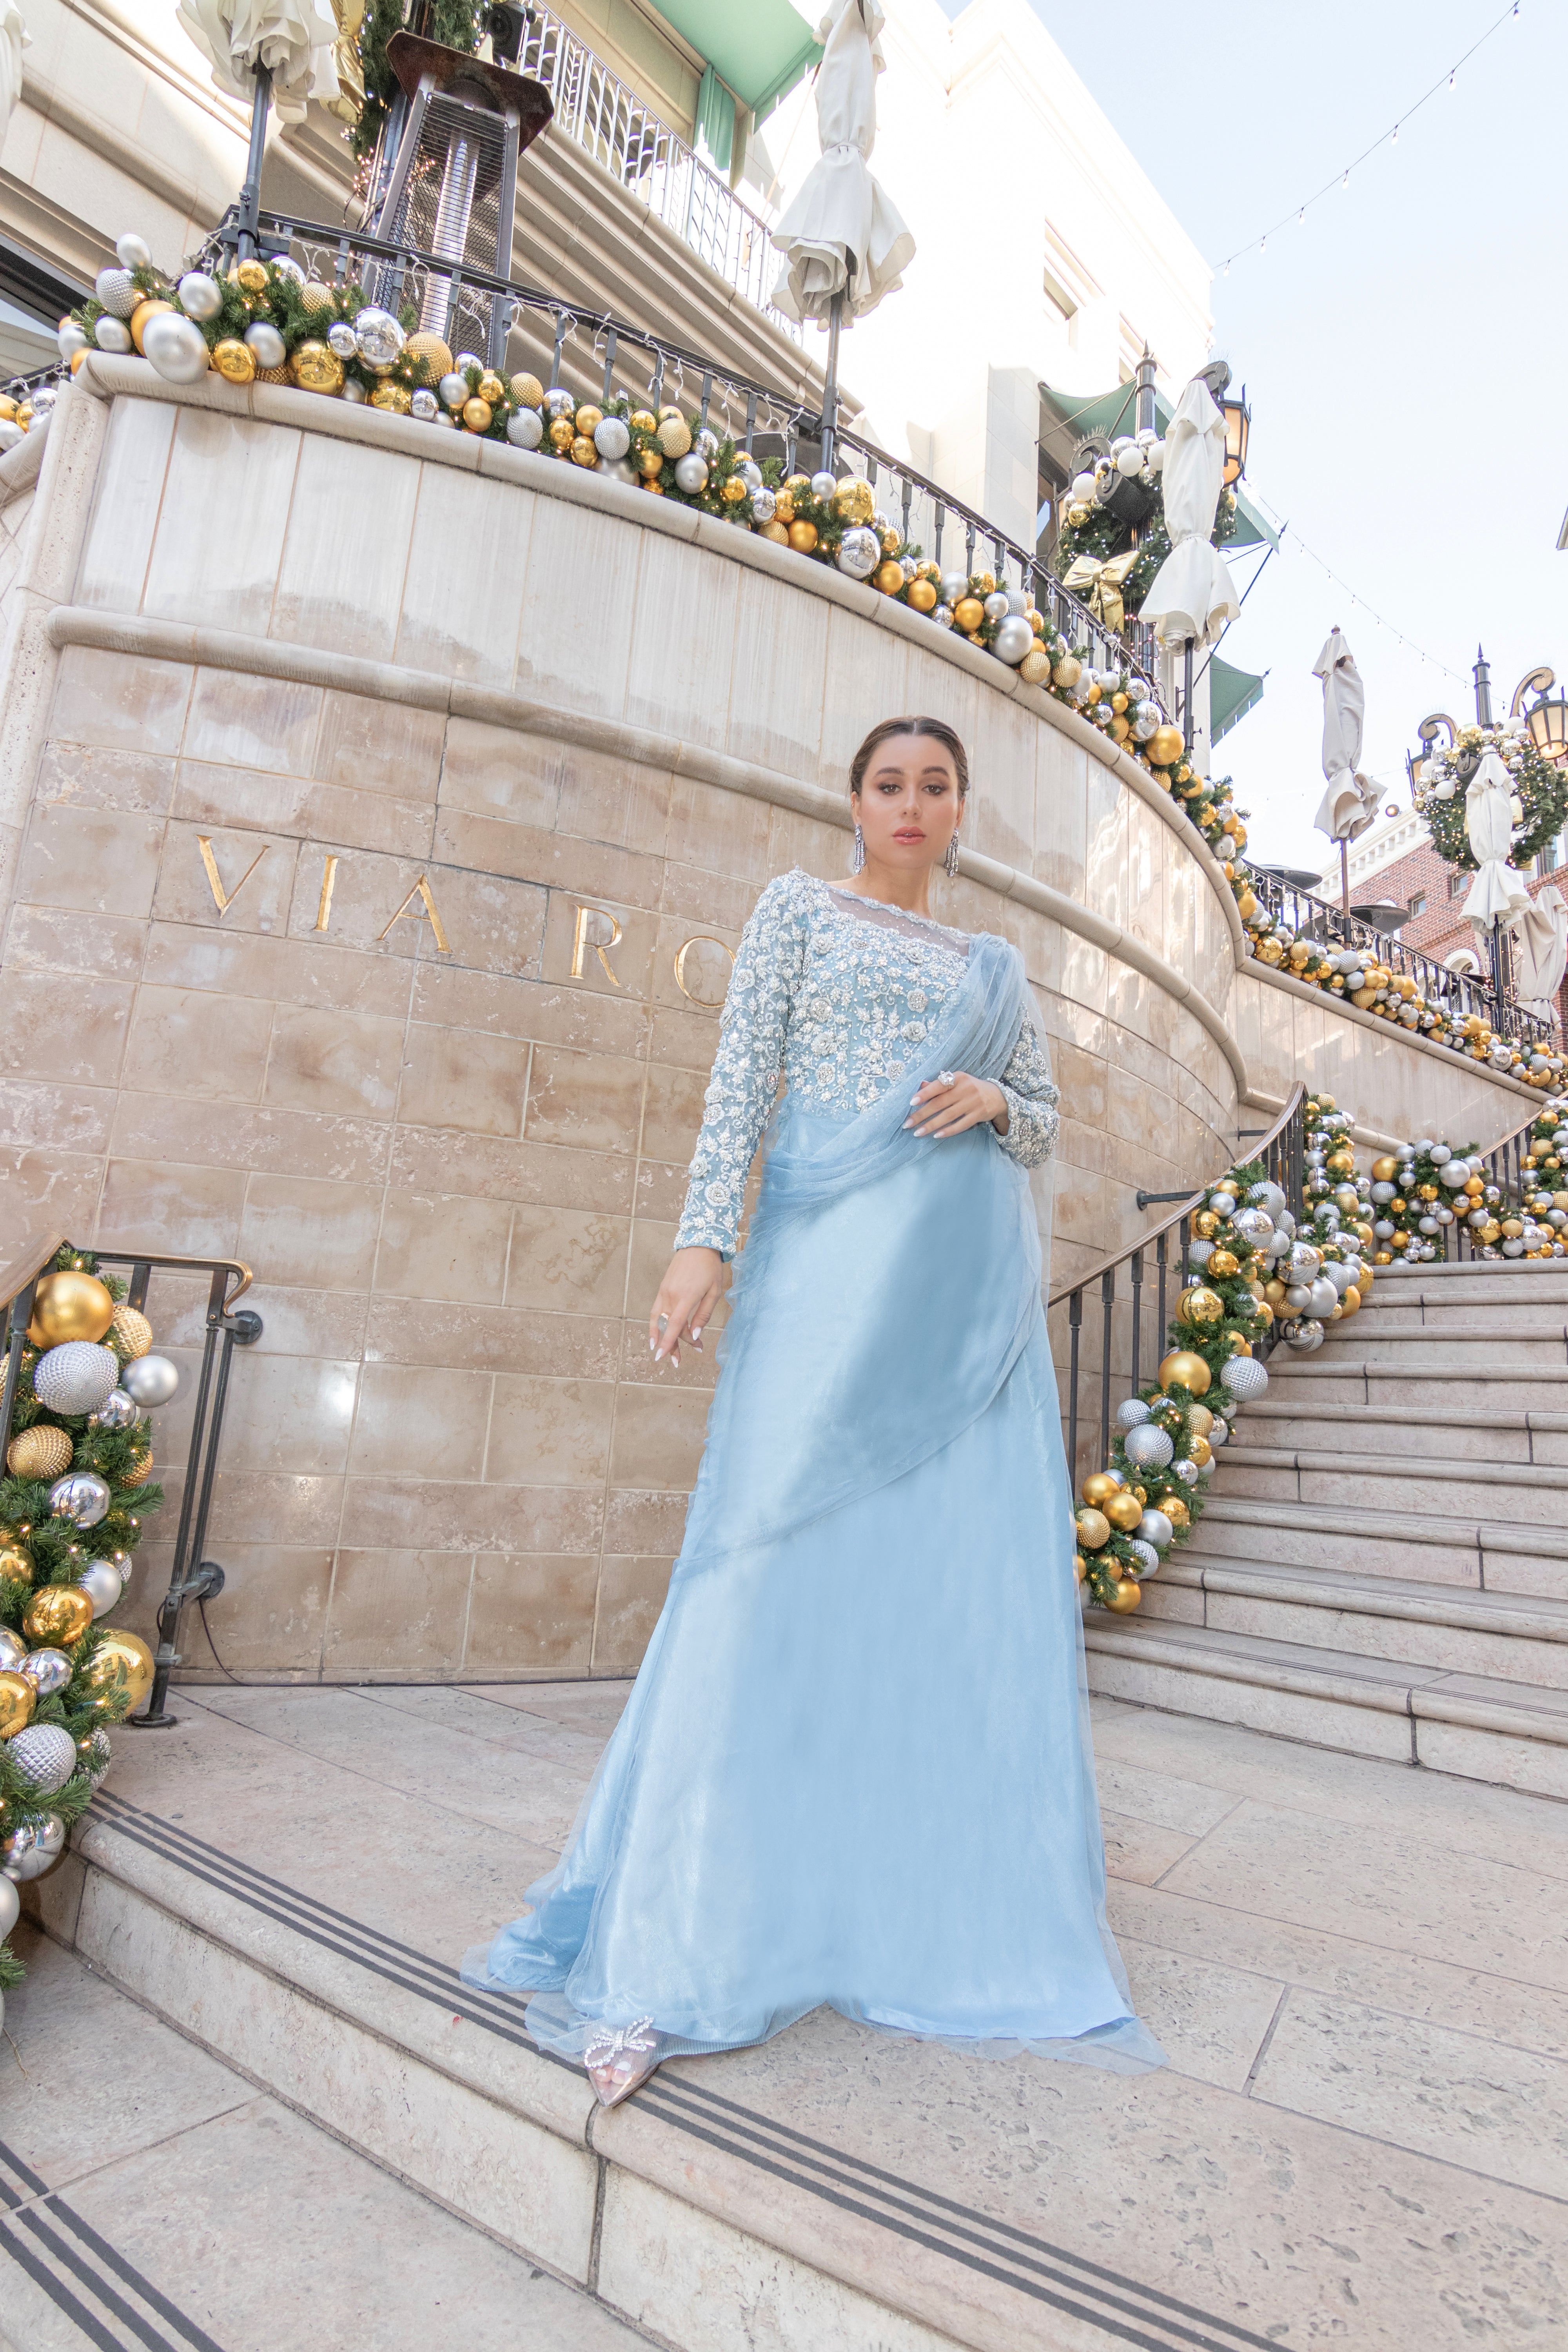 "Icy blue net saree: adorned blouse, stones, beads. Timeless grace, glamorous allure."